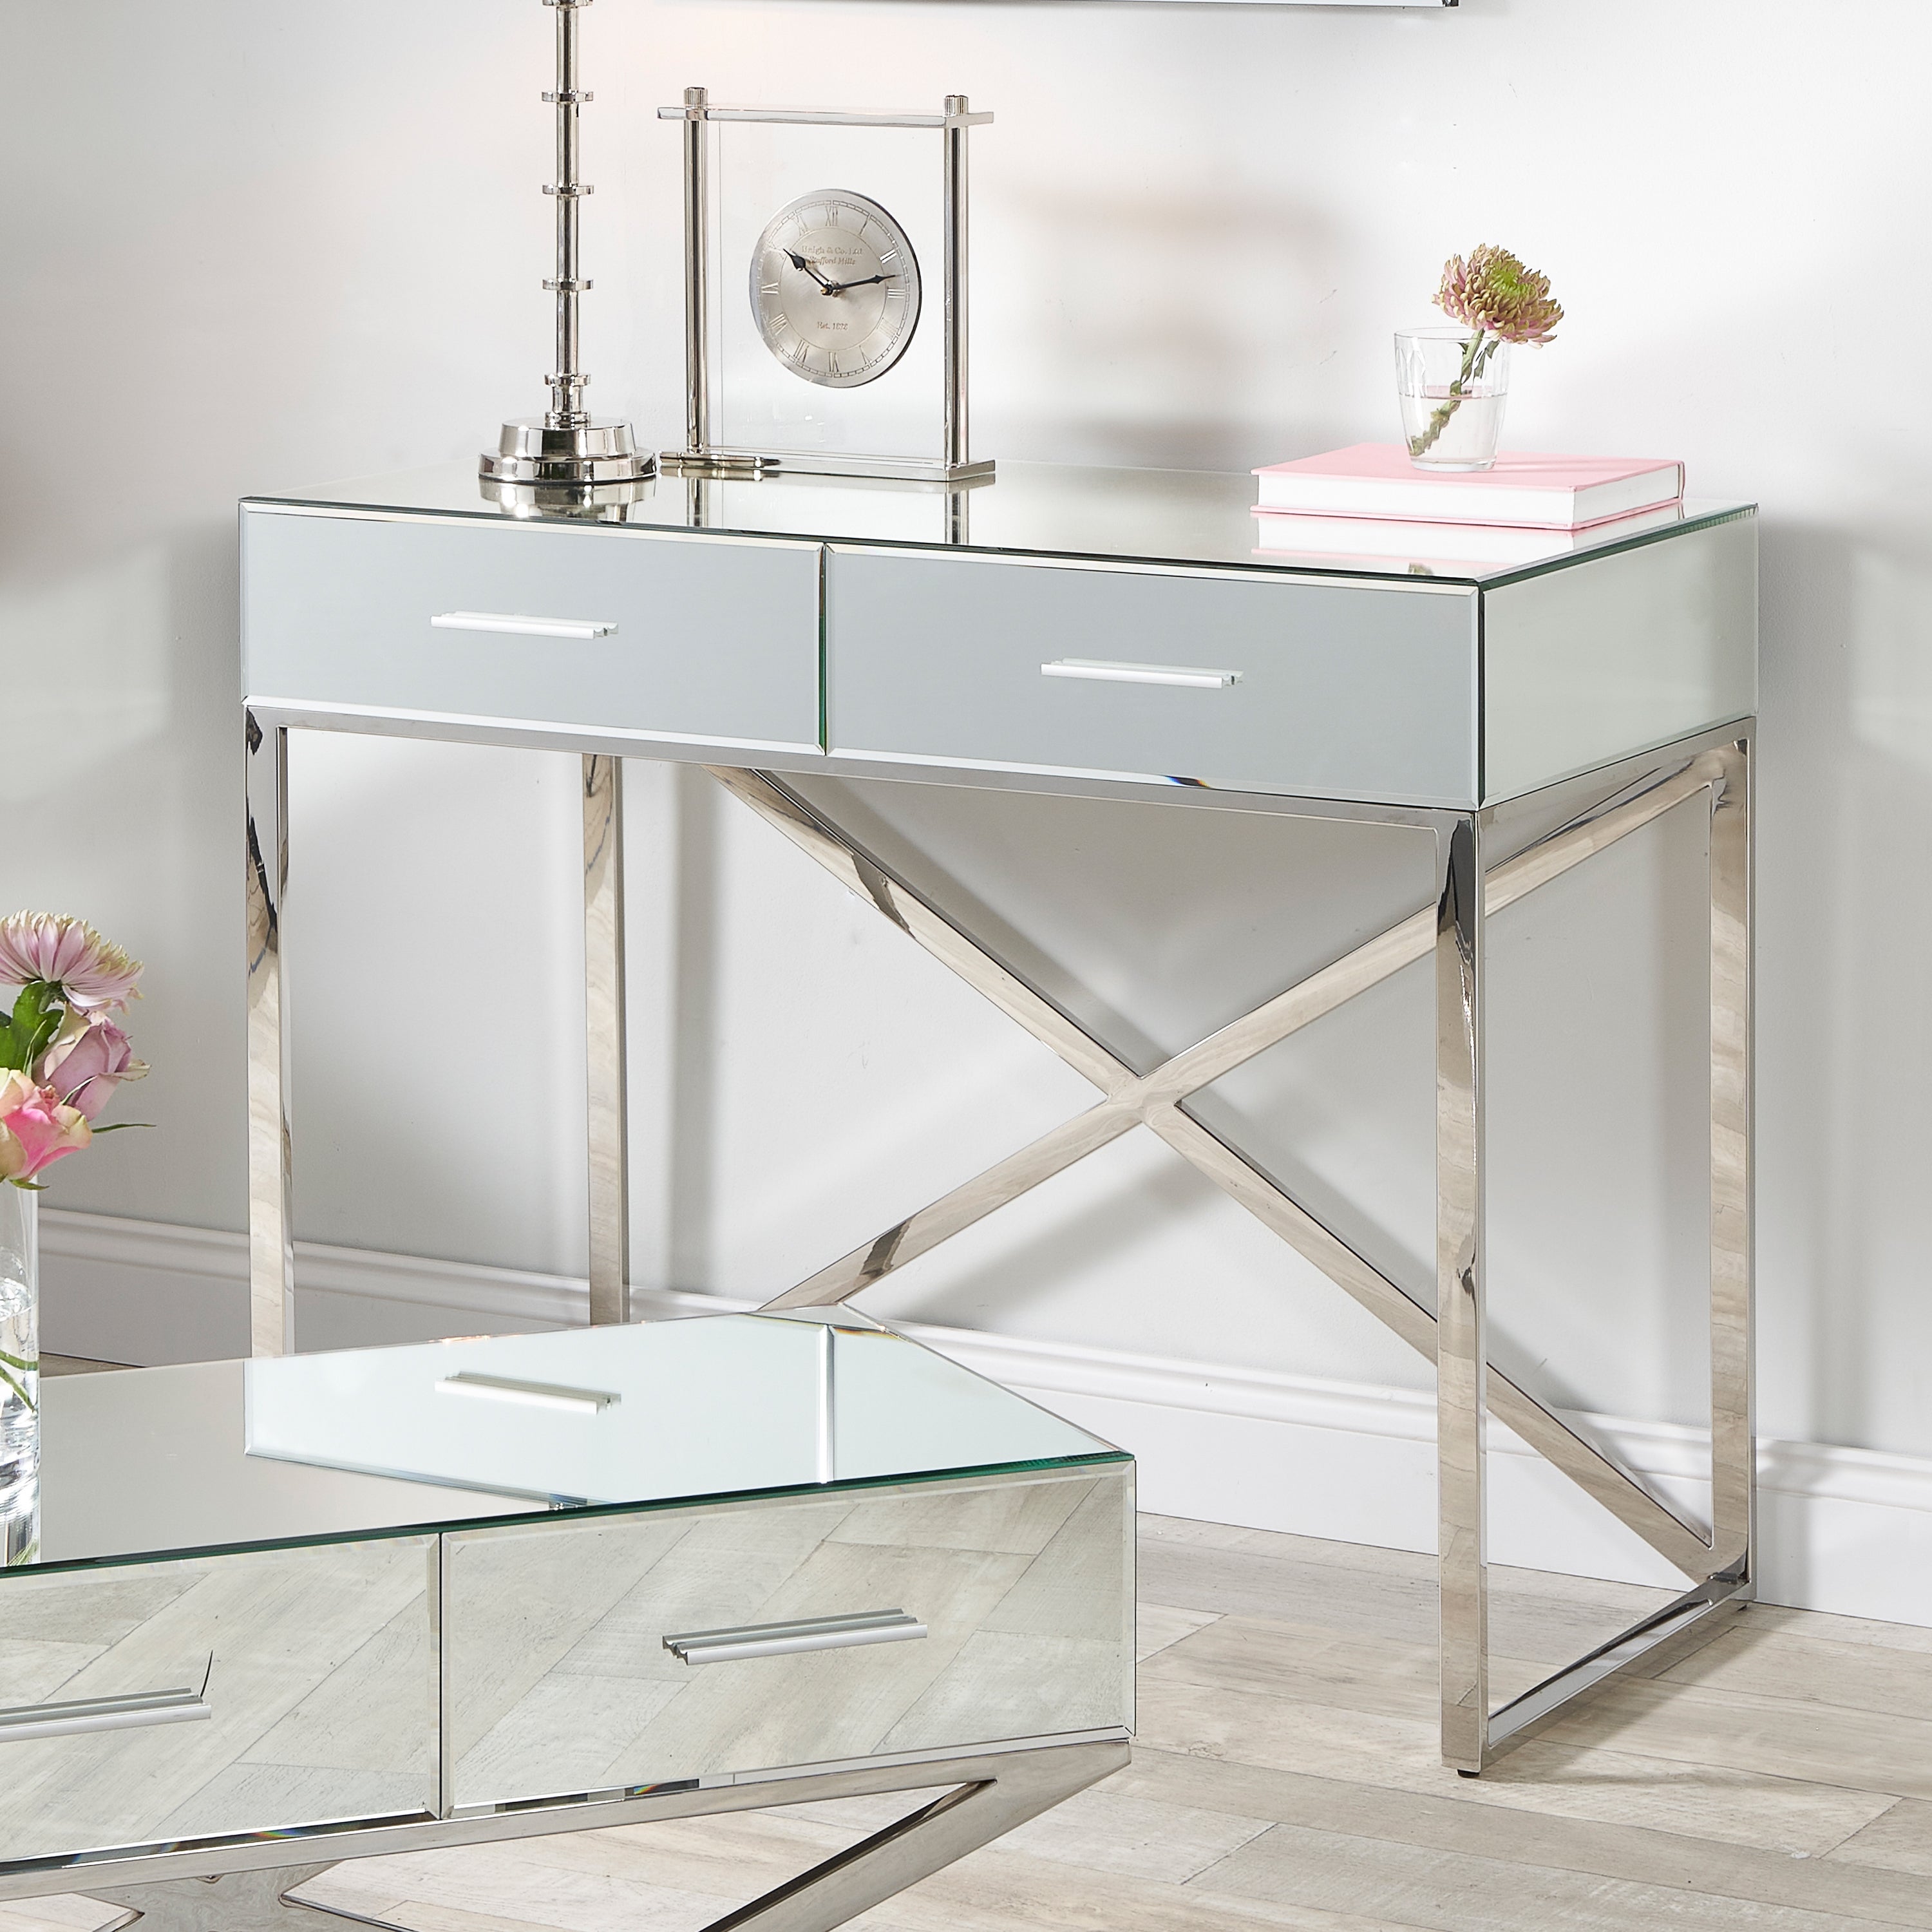 Pacific Rocco 2 Drawer Mirrored Dressing Table